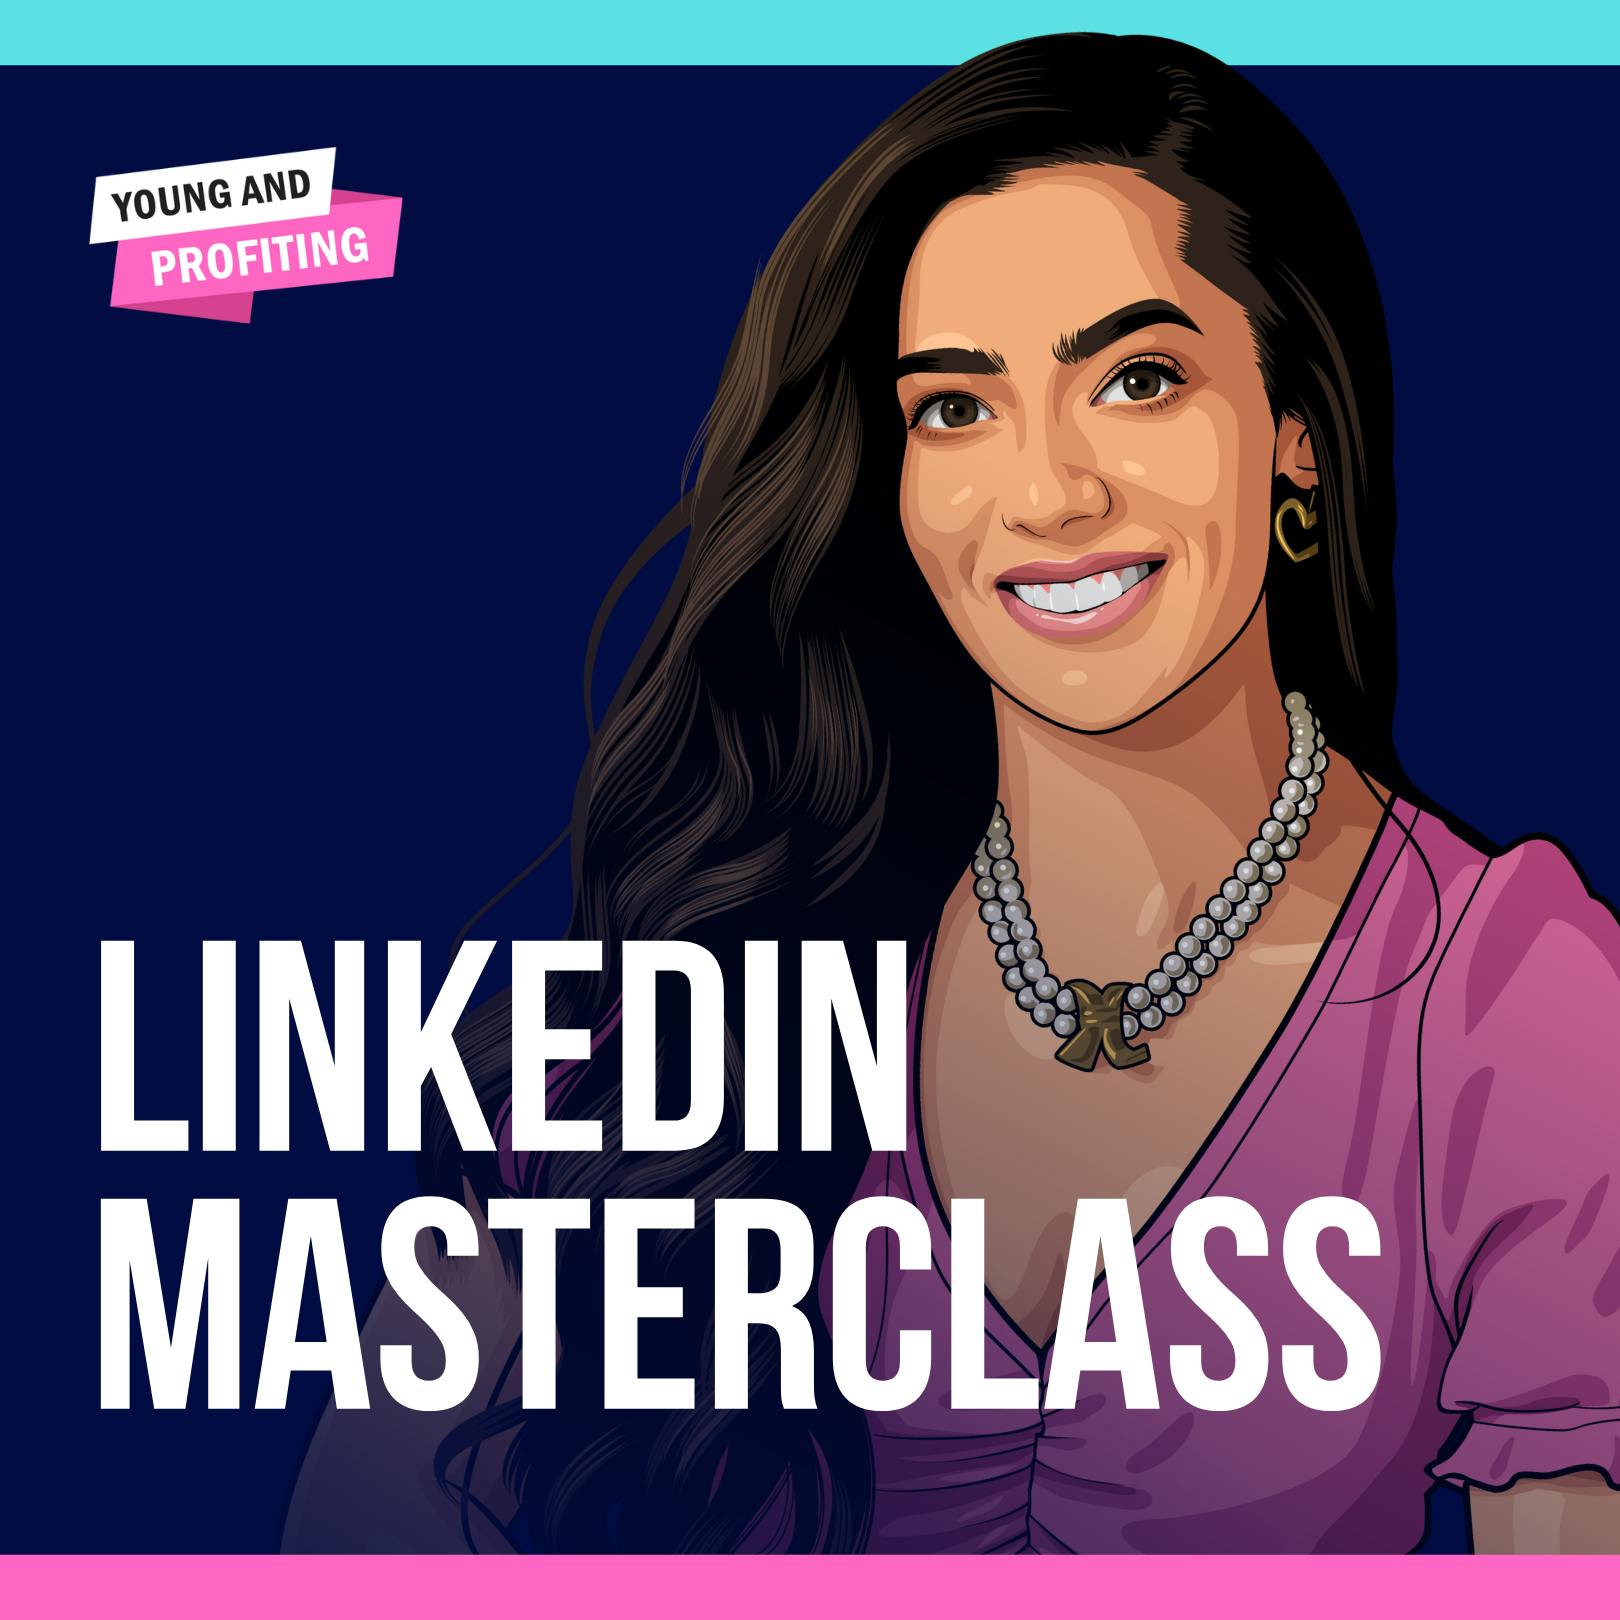 LinkedIn Masterclass: The LinkedIn Secrets That Scaled My Business from 0 to $5M+ 